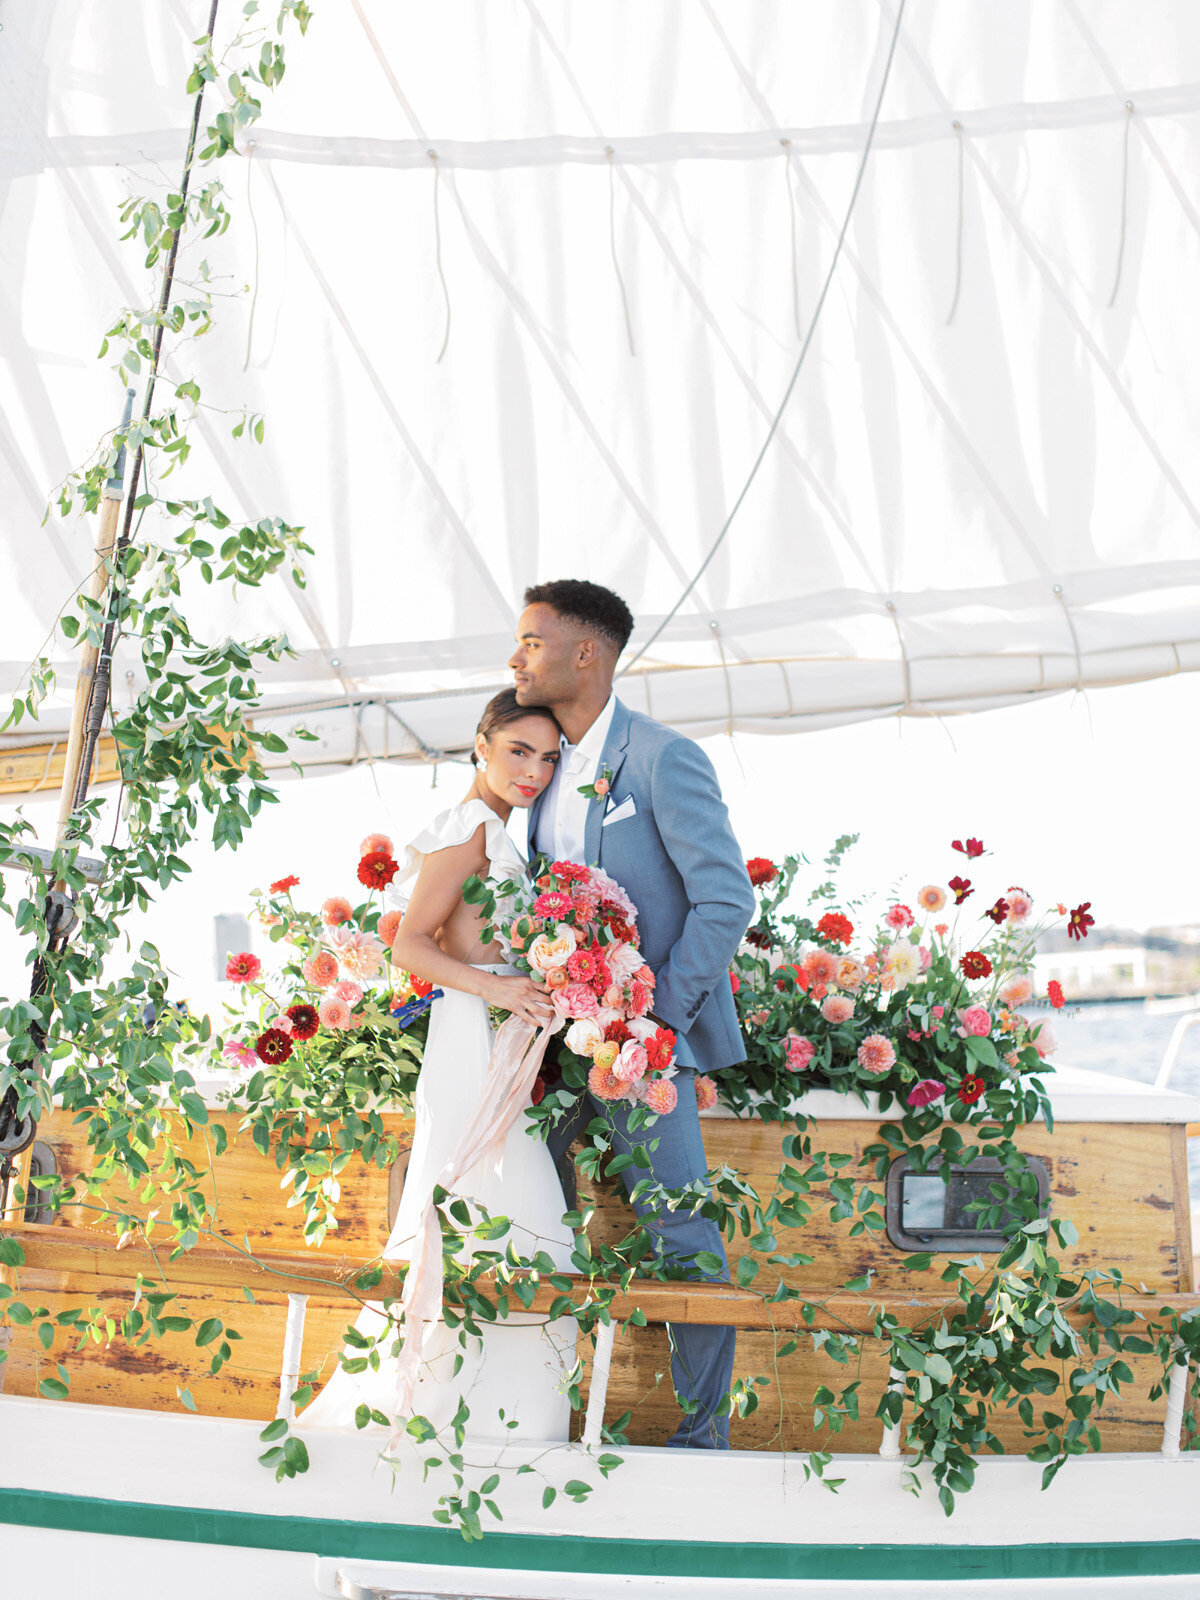 Kate-Murtaugh-Events-elopement-wedding-planner-Boston-Harbor-sailing-sail-boat-yacht-greenery-floral-installation-couple-bride-groom